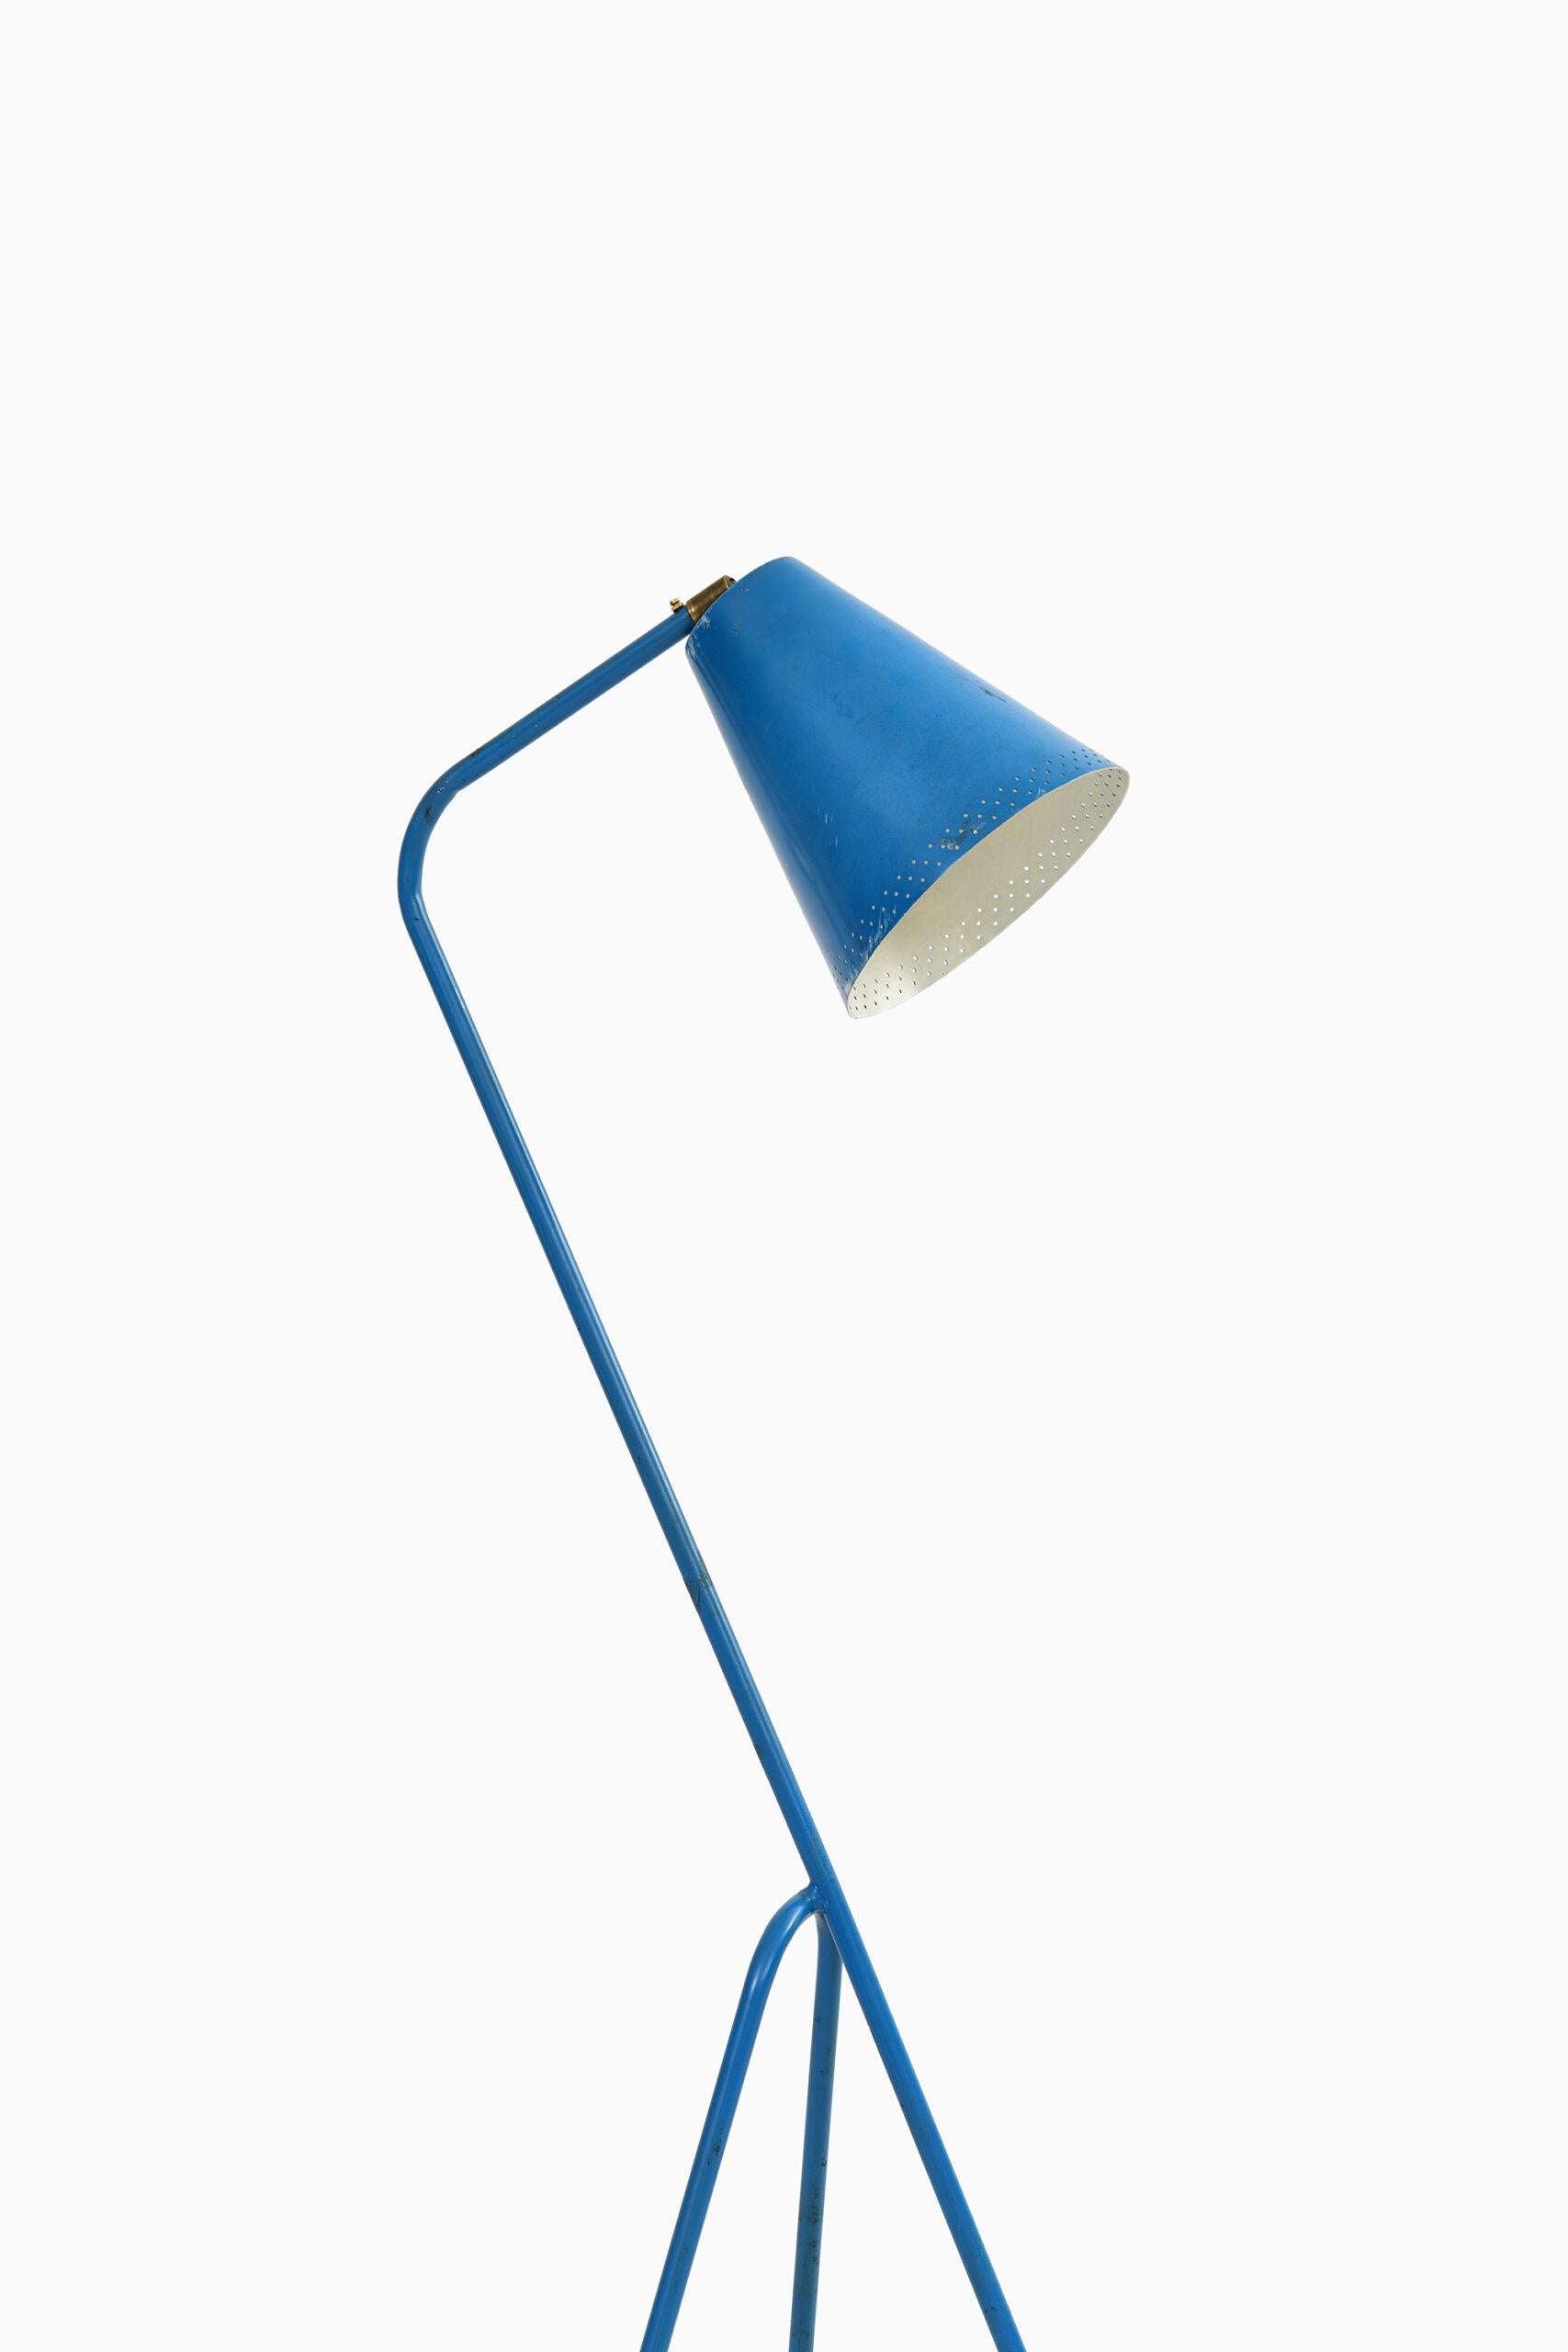 Rare floor lamp by unknown designer. In the style of Greta Magnusson-Grossman. Probably produced in Sweden.